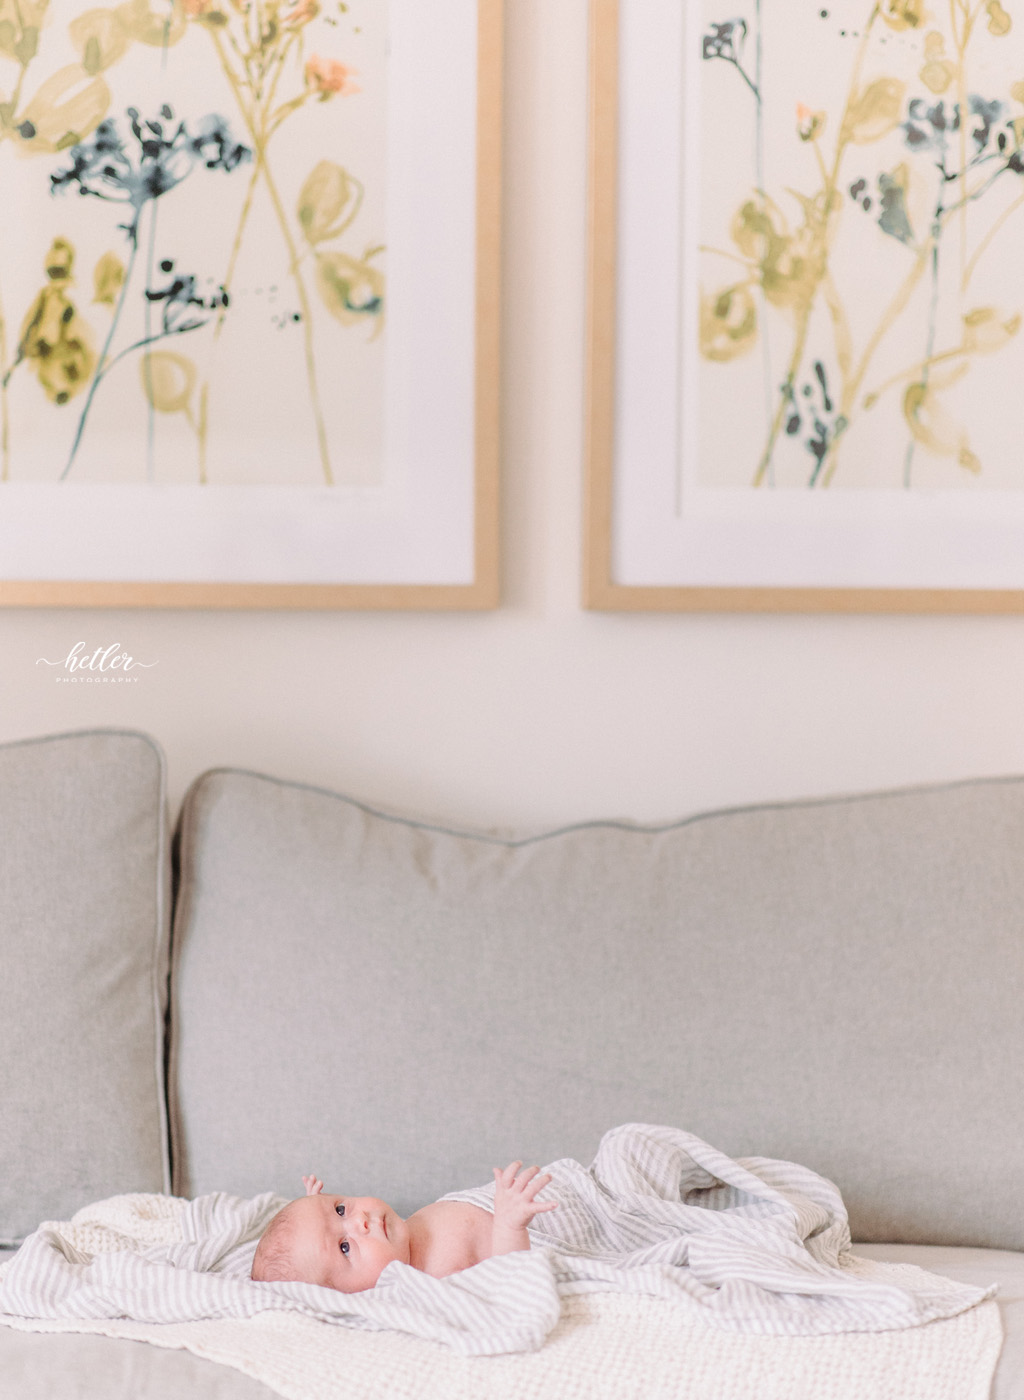 East Grand Rapids in-home newborn session with a sweet baby boy and gorgeous nursery full of neutral colors.